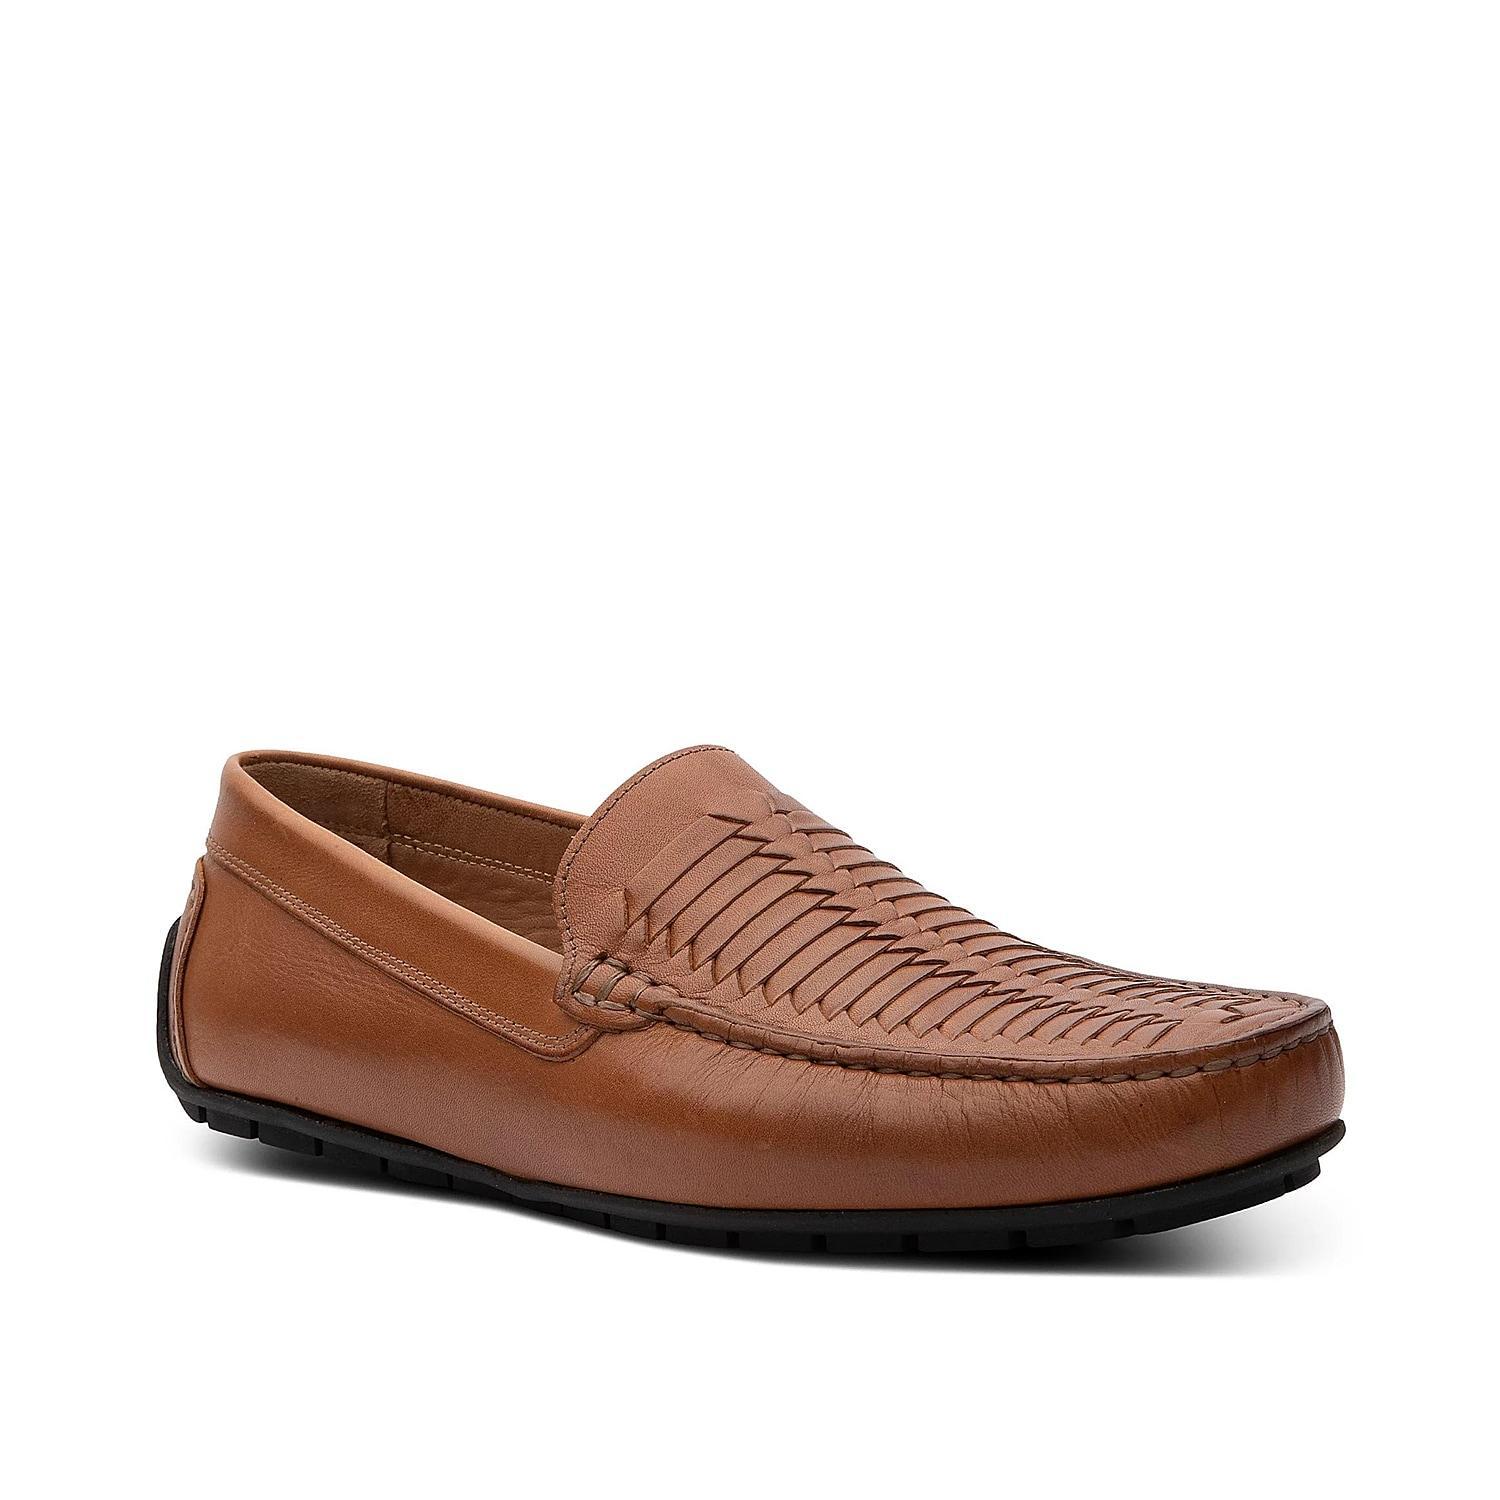 Johnston & Murphy Maggie Chain Loafer Product Image